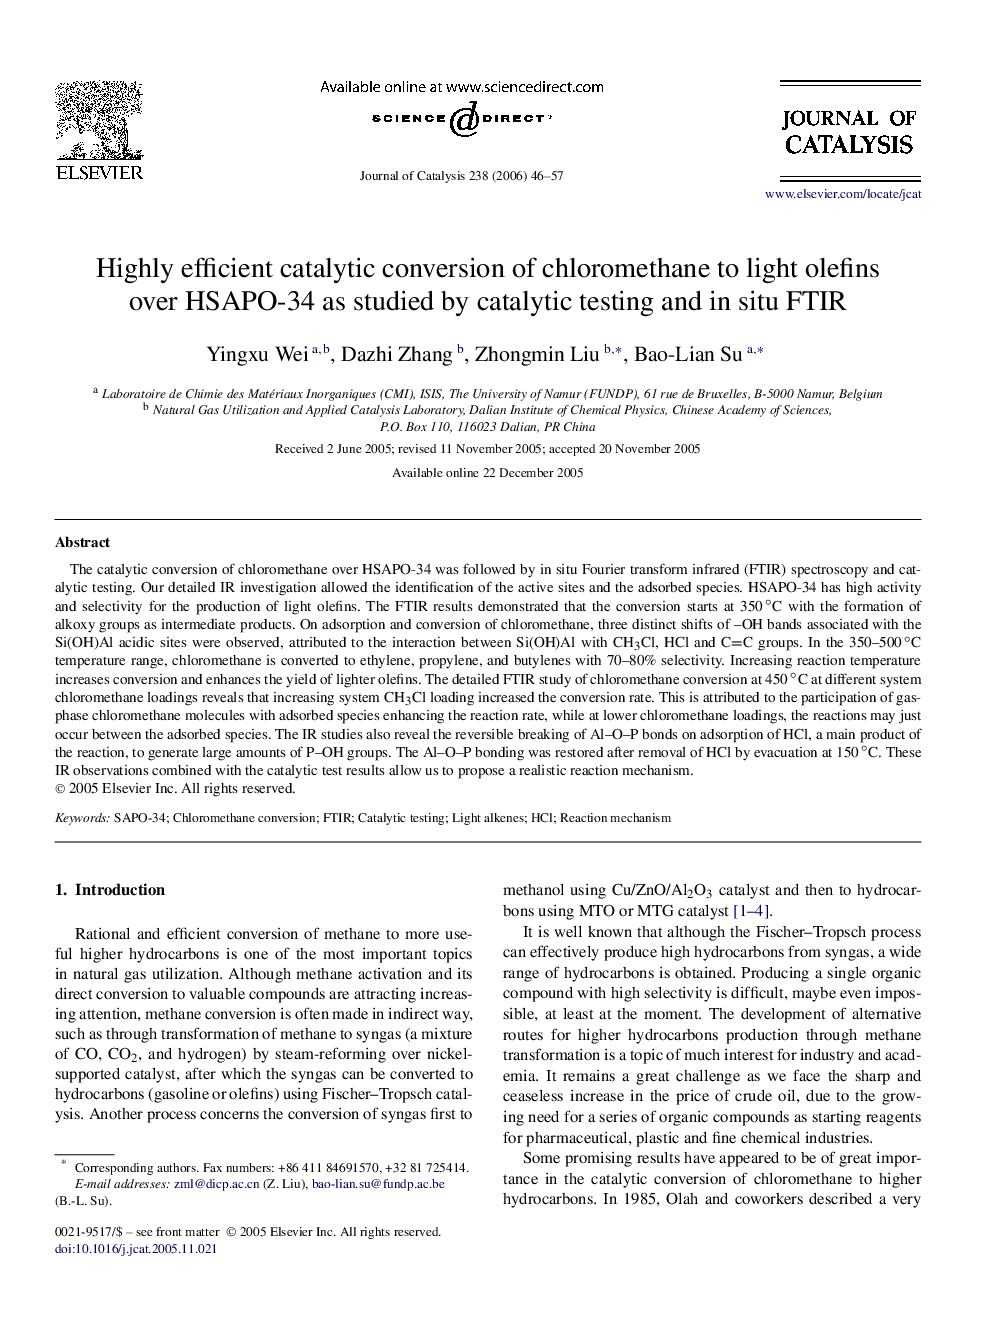 Highly efficient catalytic conversion of chloromethane to light olefins over HSAPO-34 as studied by catalytic testing and in situ FTIR